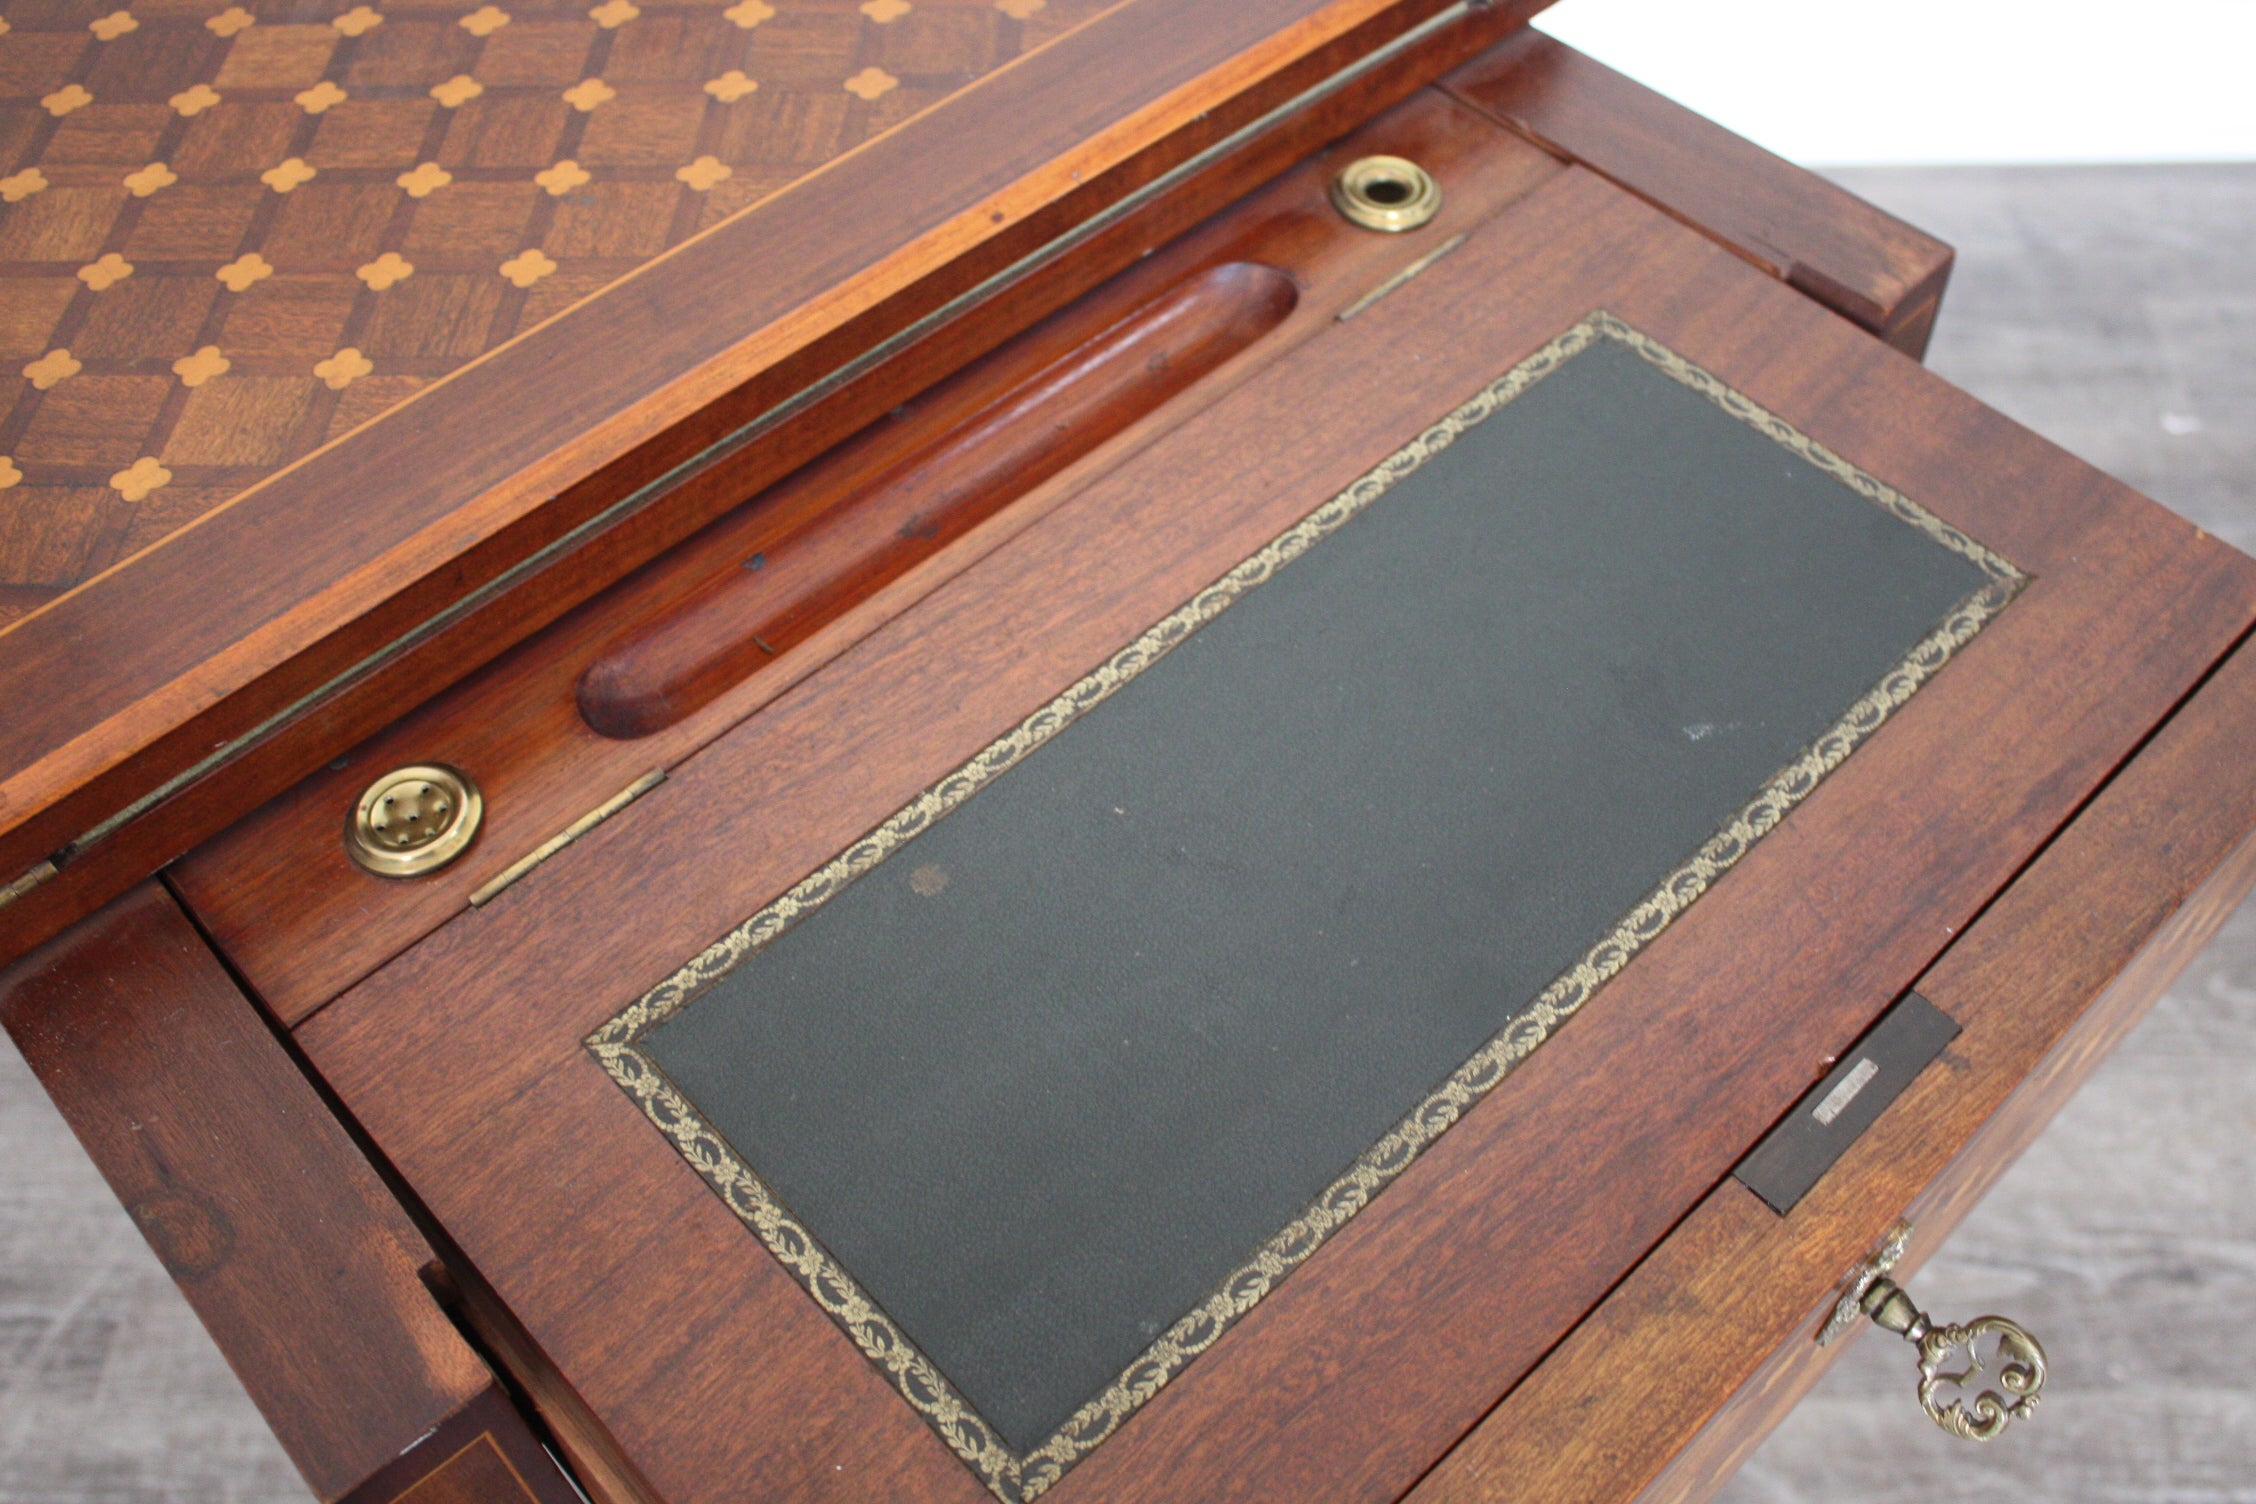 This piece is just wonderful and so refine. When you pull the drawer, a small top desk appears that can be open to the inside drawer.
The top of the table can be unfold to be game table.
This piece is just so precious. 